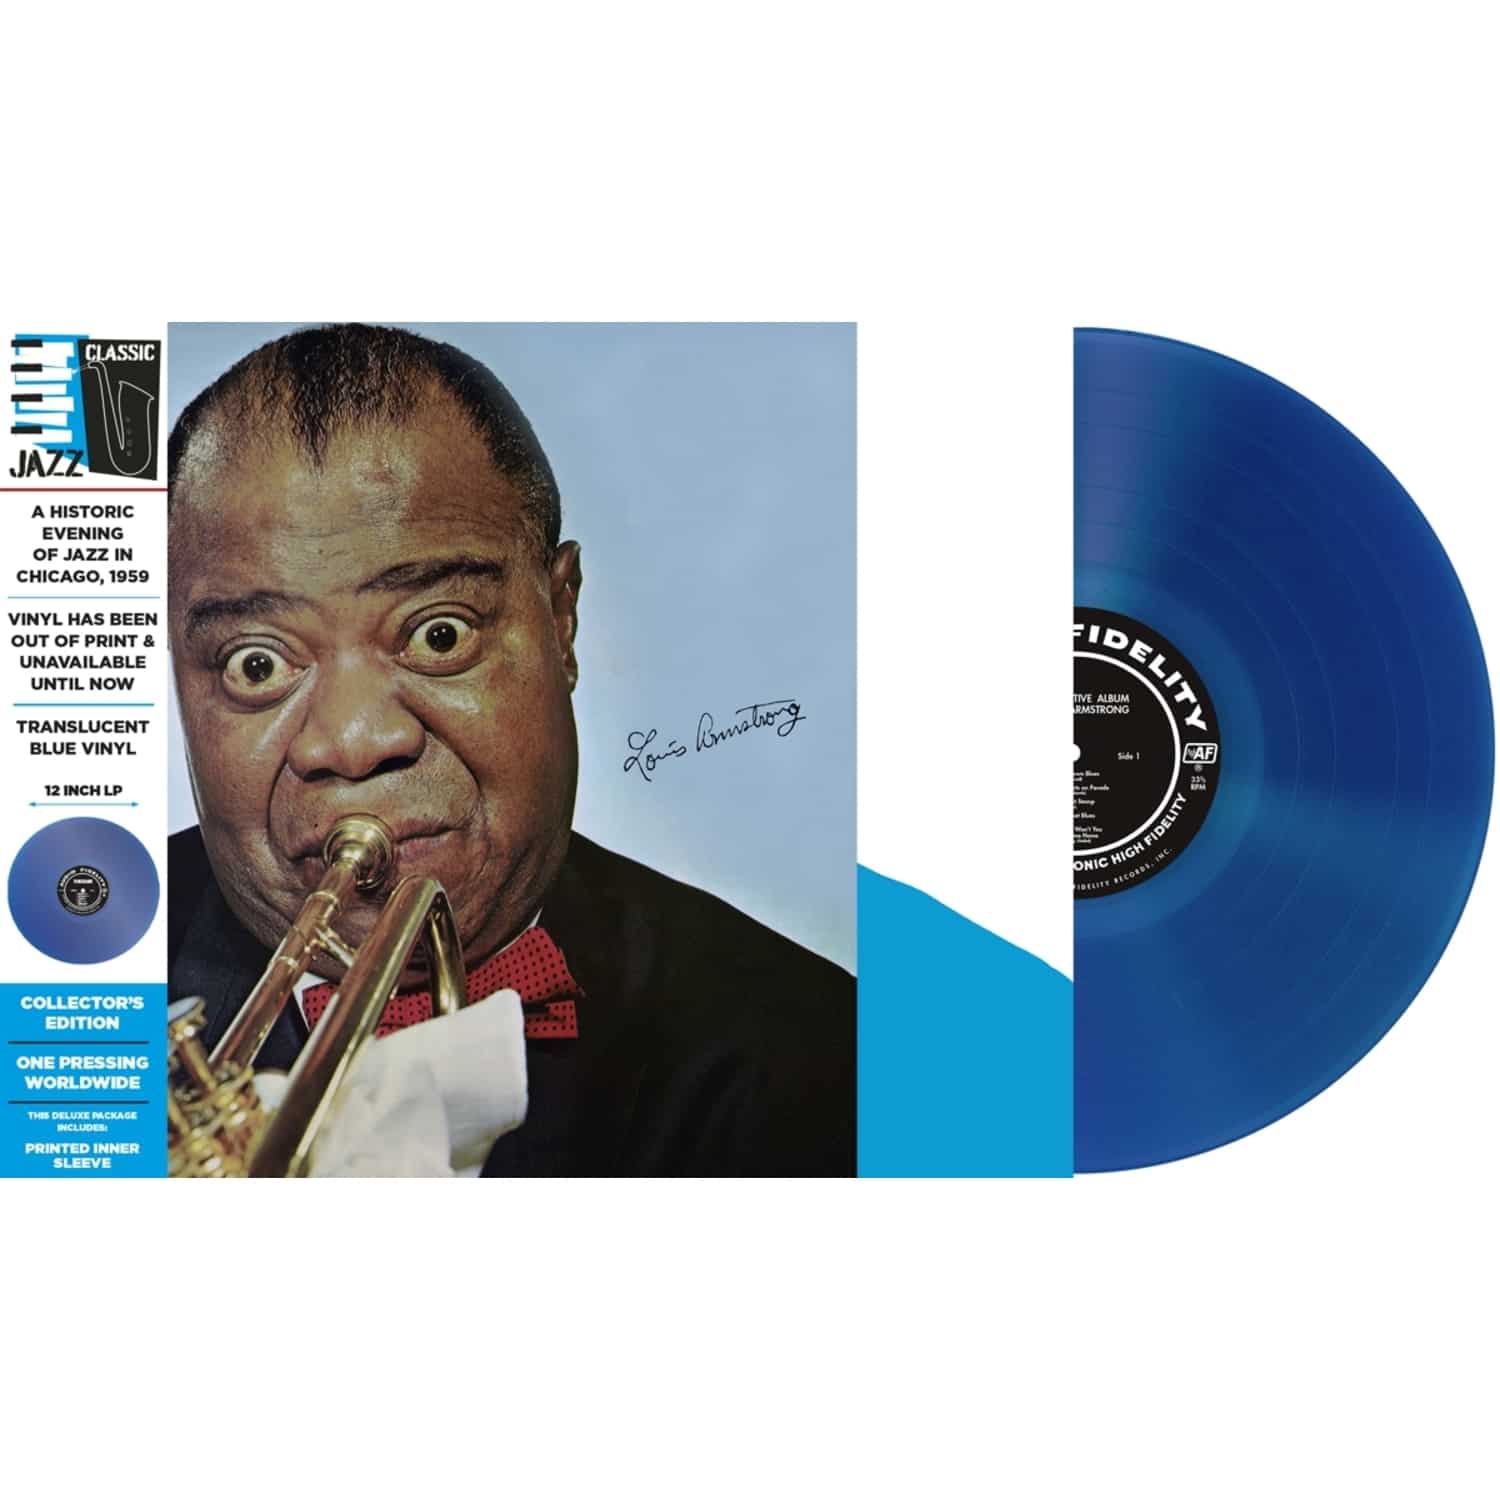 Louis Armstrong - THE DEFINITIVE ALBUM BY LOUIS ARMSTRONG 